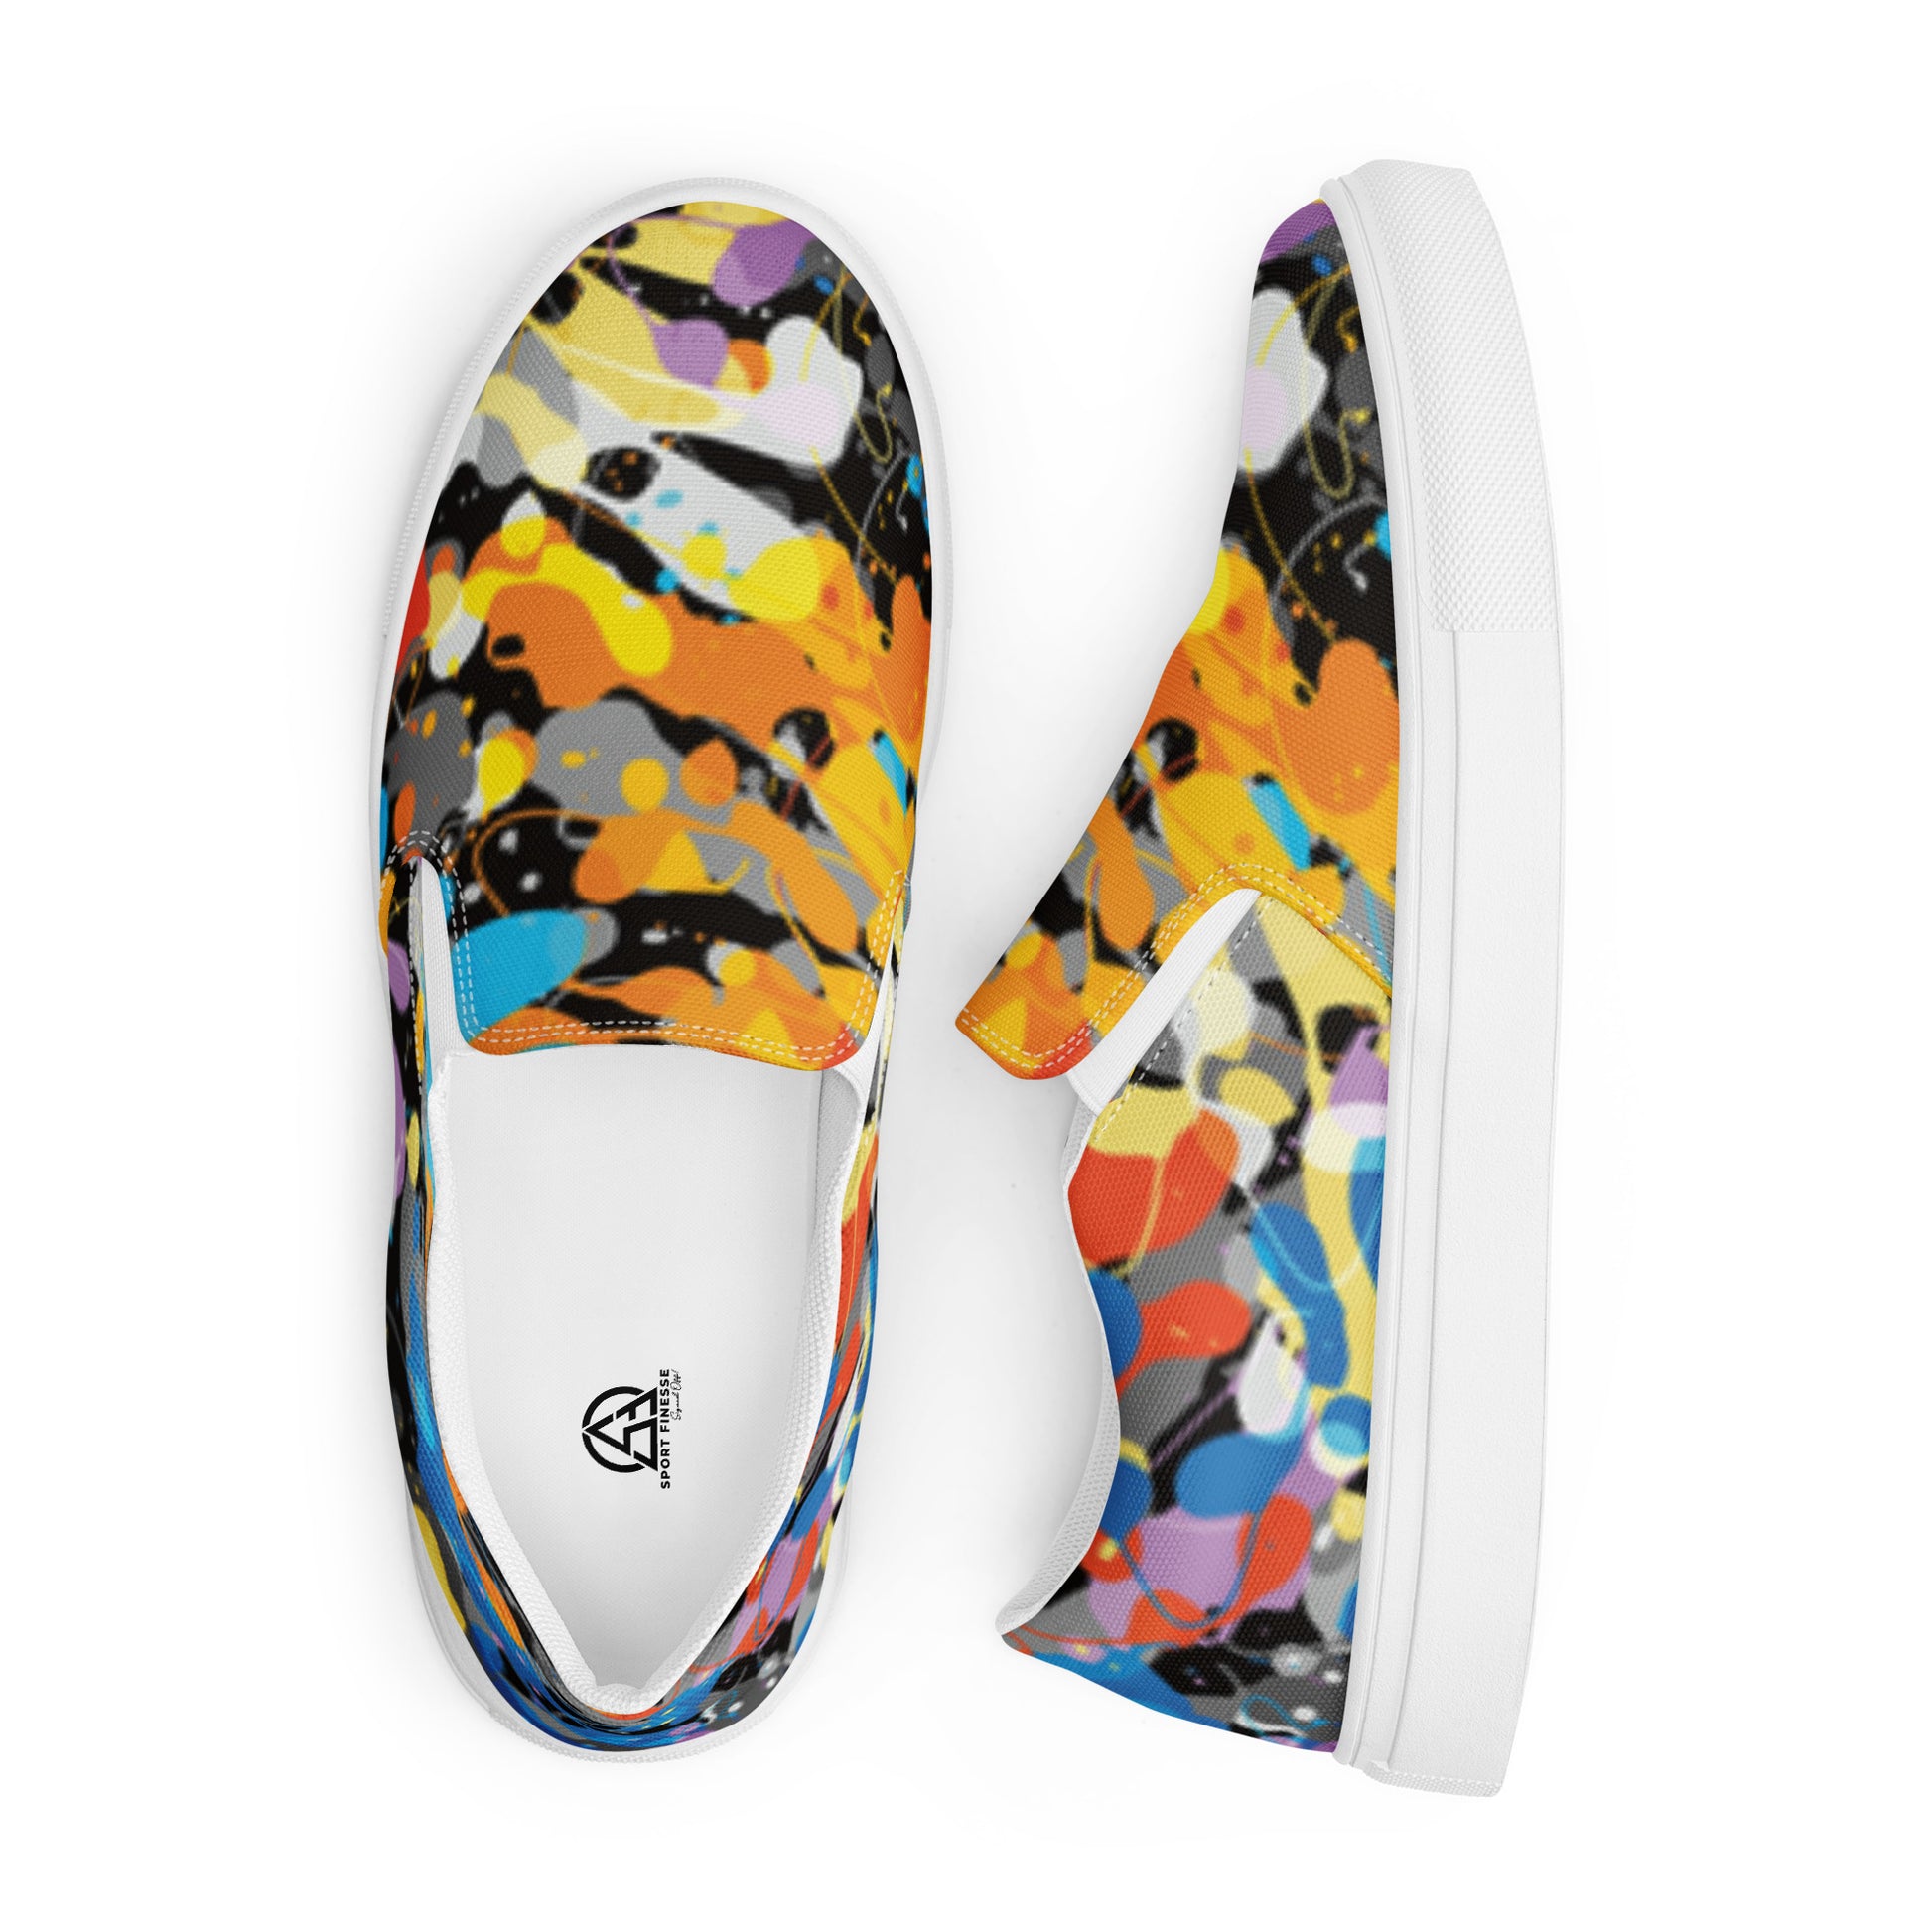 Colorful lava print Women's slip-on shoes - Sport Finesse